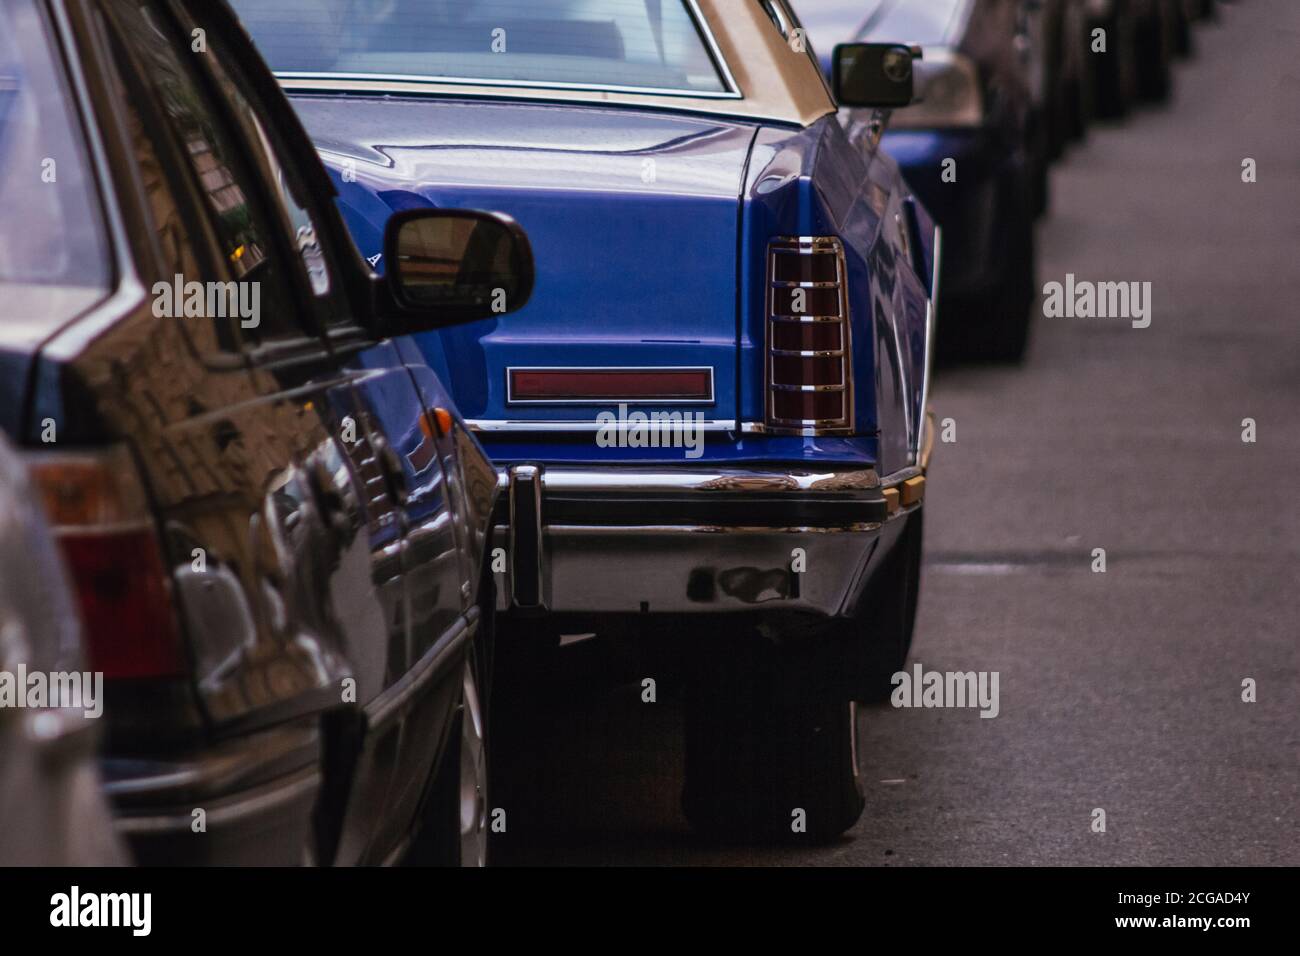 retro american car of the 70s on the street of the city Stock Photo